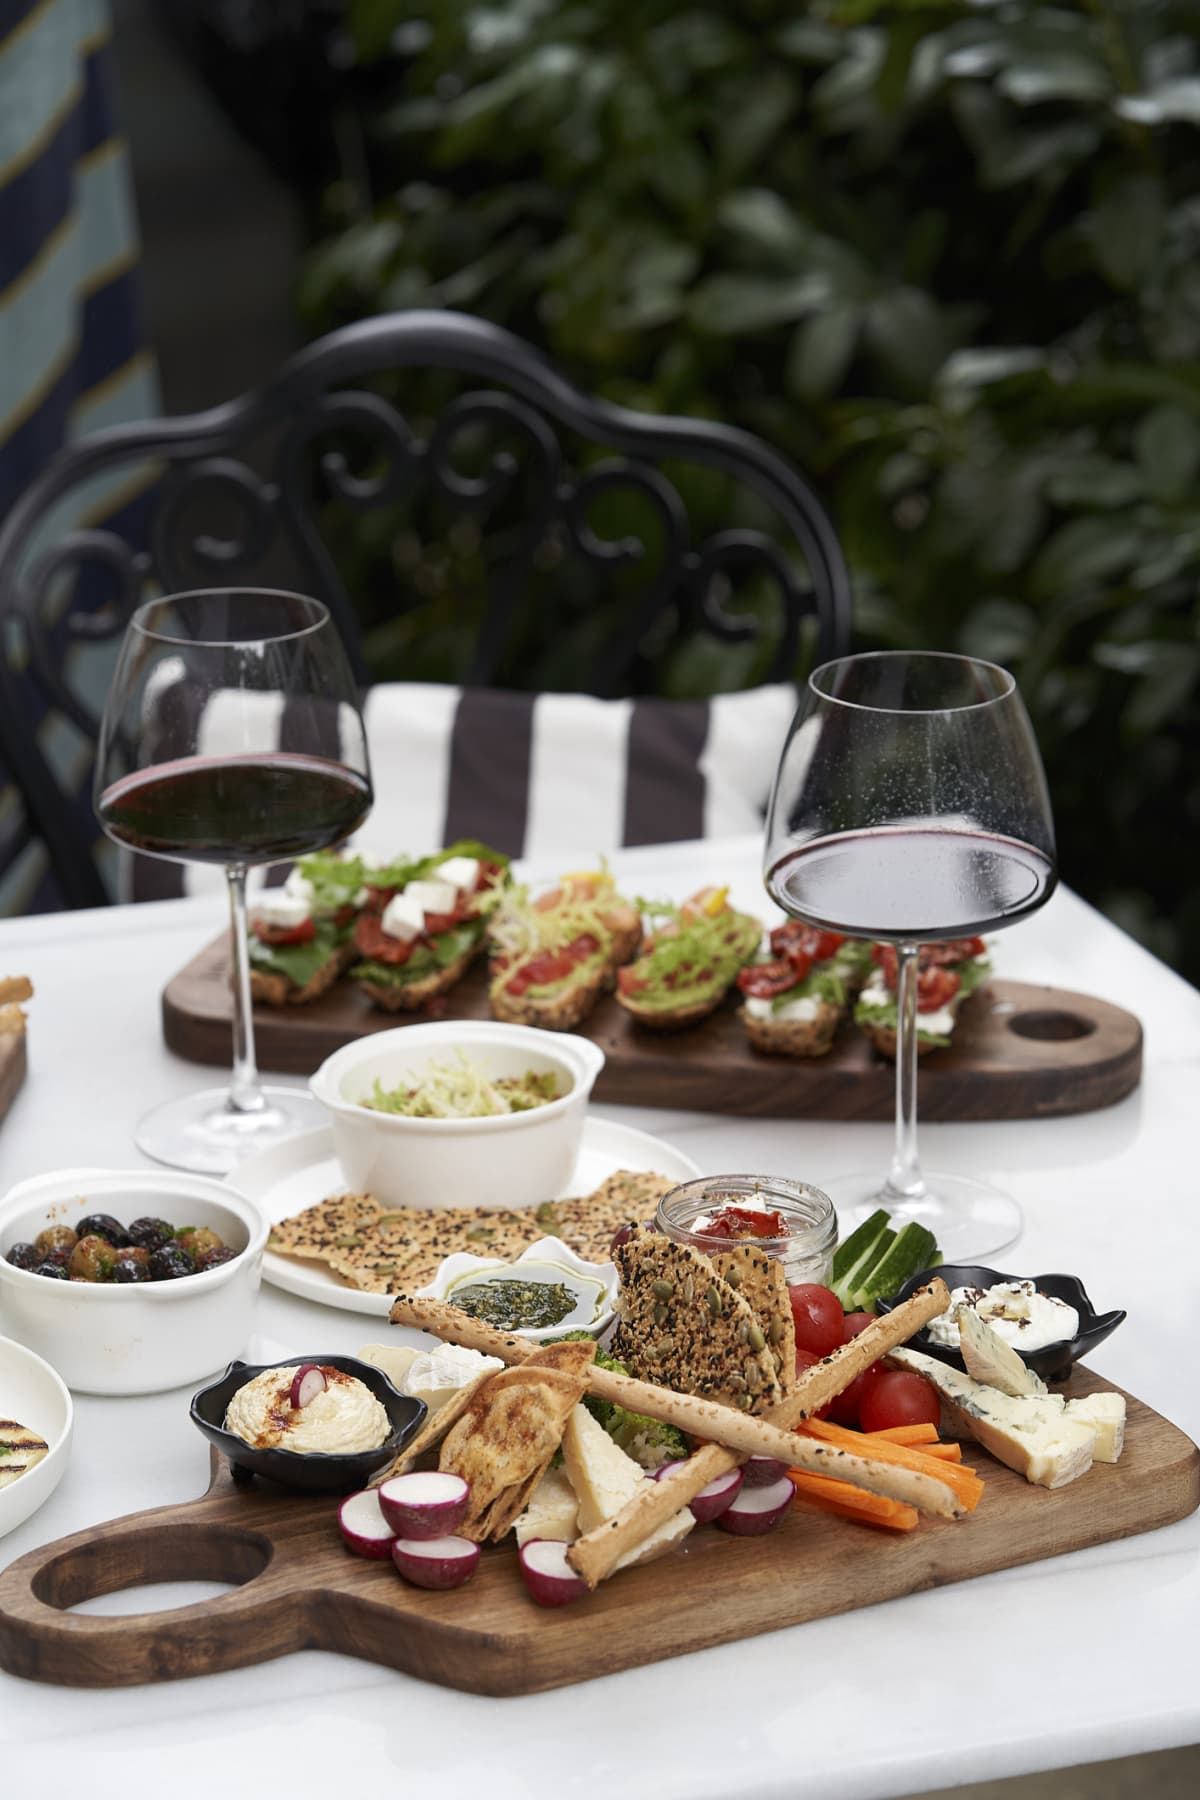 Italian antipasti wine snacks on table. Red wine glasses, cheese variety, bruschetta, olives, prosciutto, outdoor party